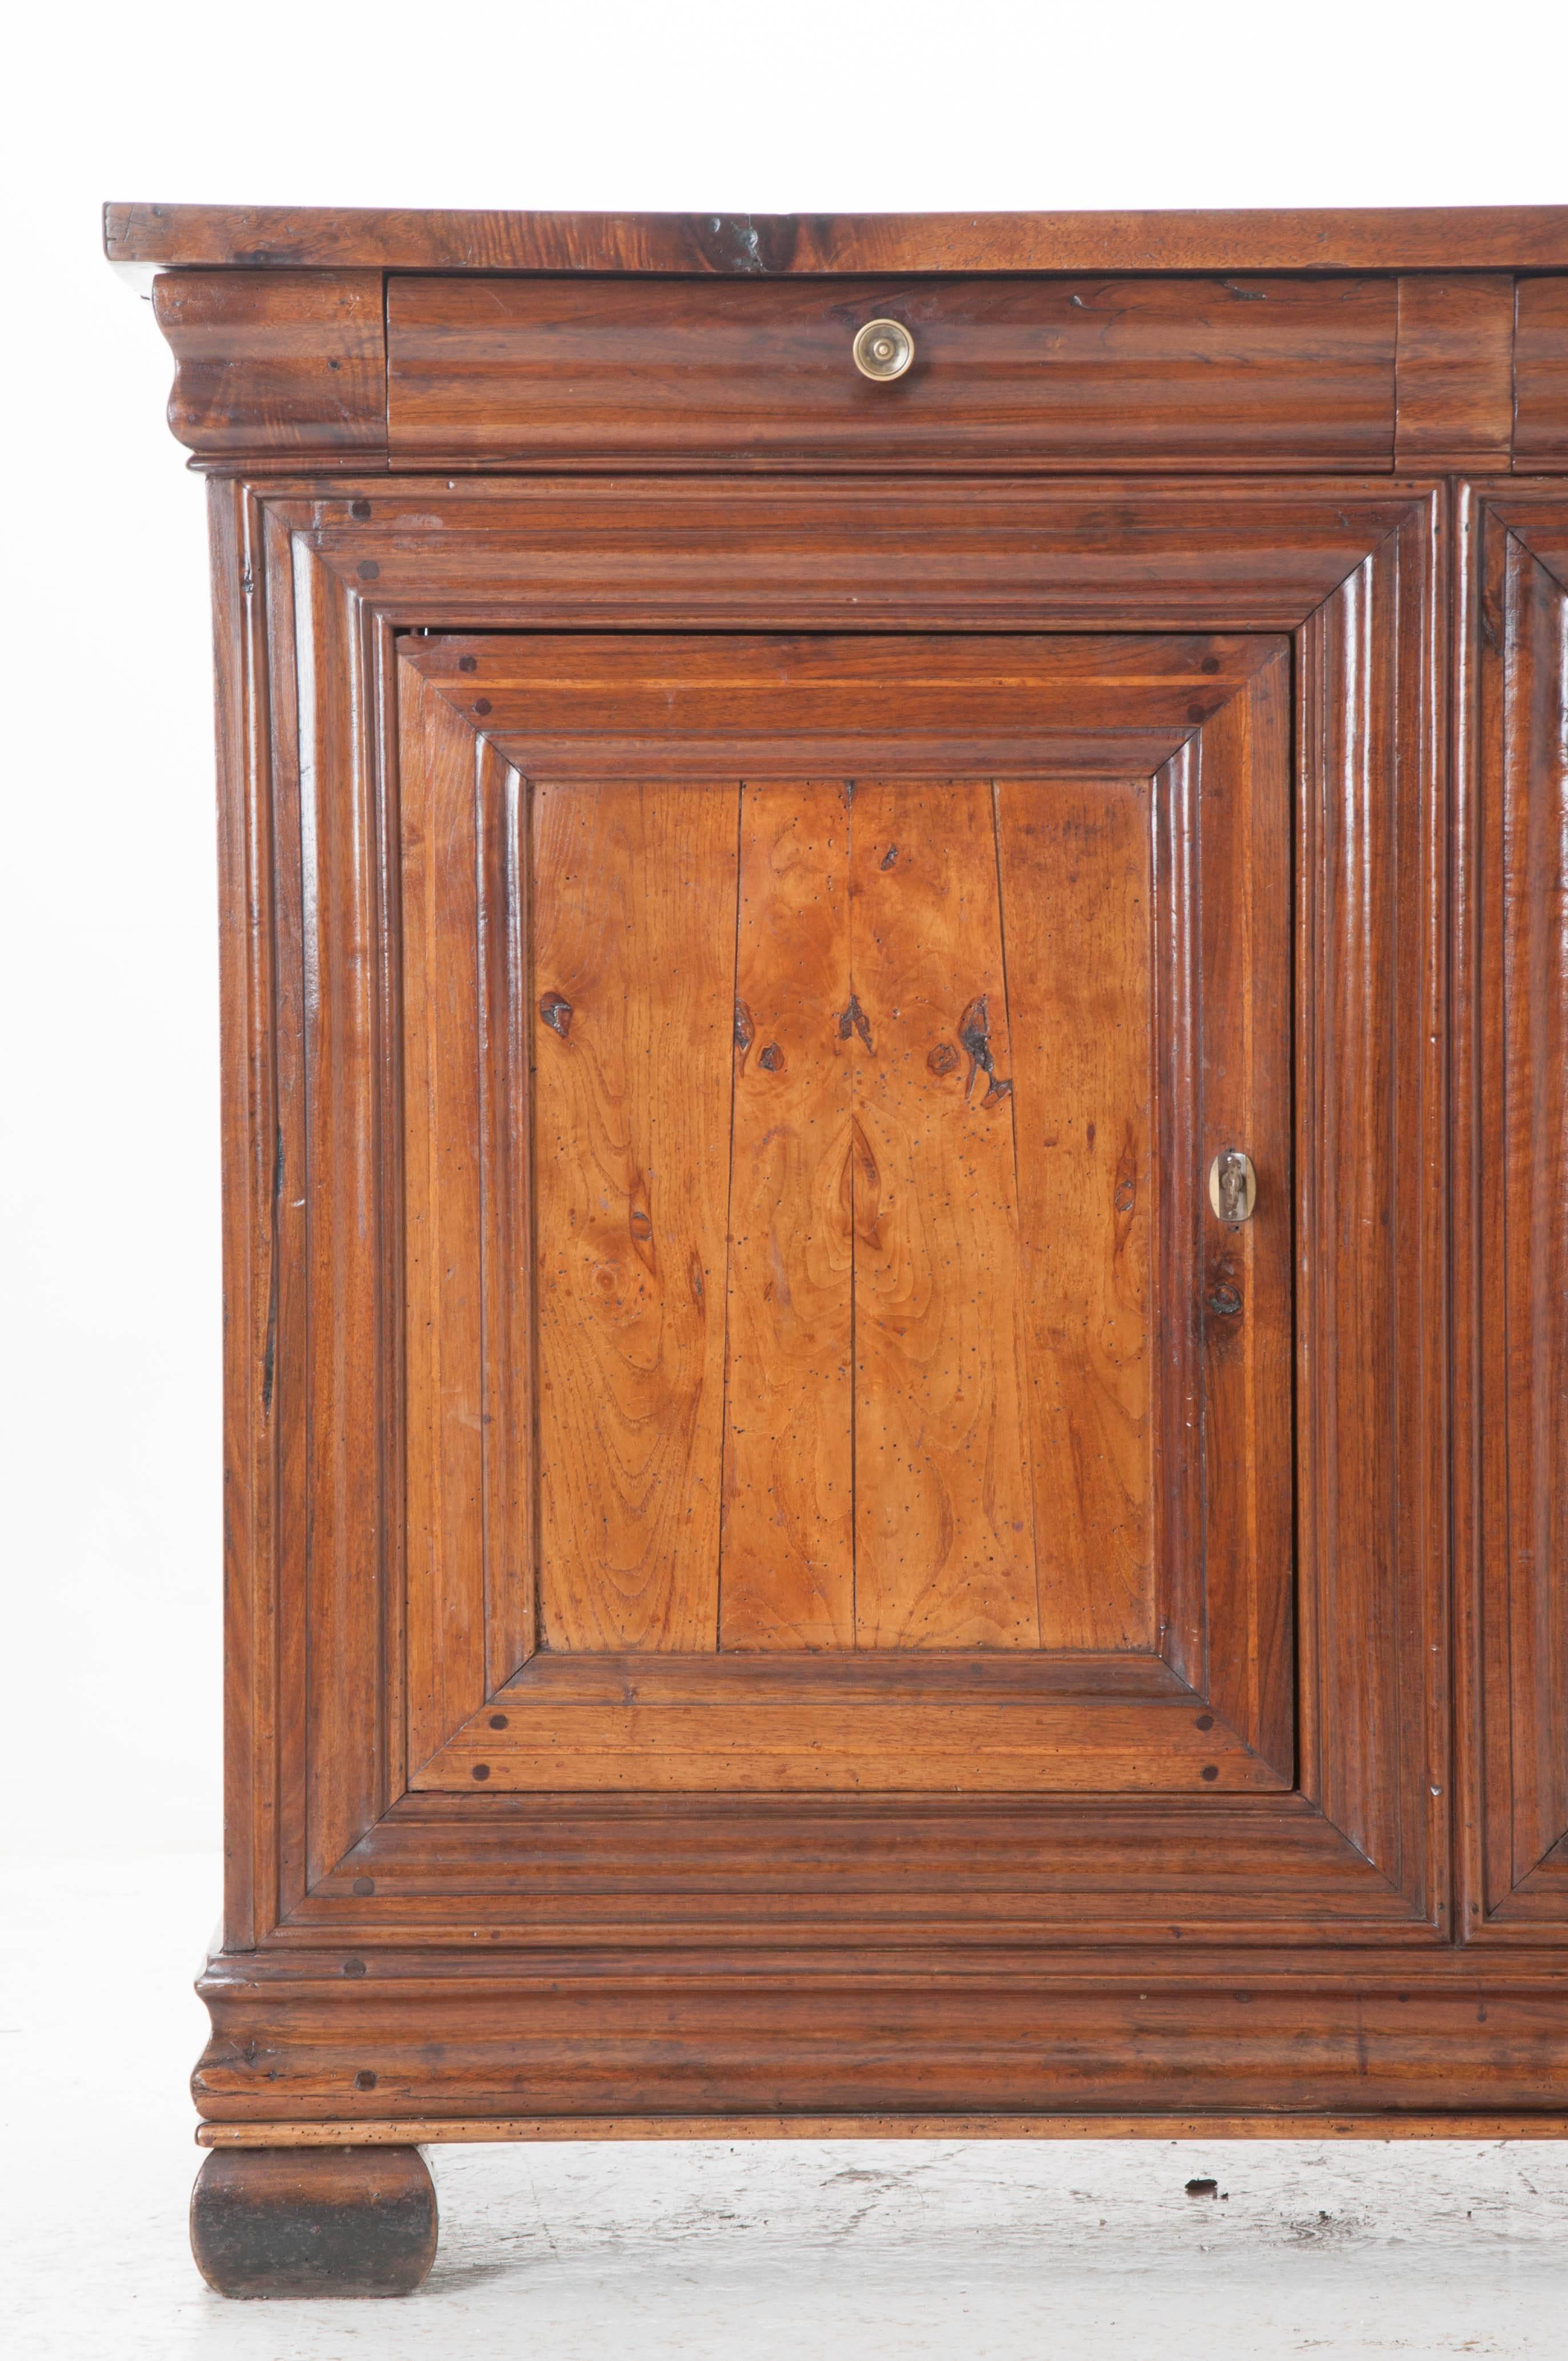 A Louis Philippe walnut enfilade with three drawers situated above three doors from 19th century France. The doors, equipped with working locks and hidden hinges, conceal a storage cavity equipped with a single fixed shelf. This solid walnut